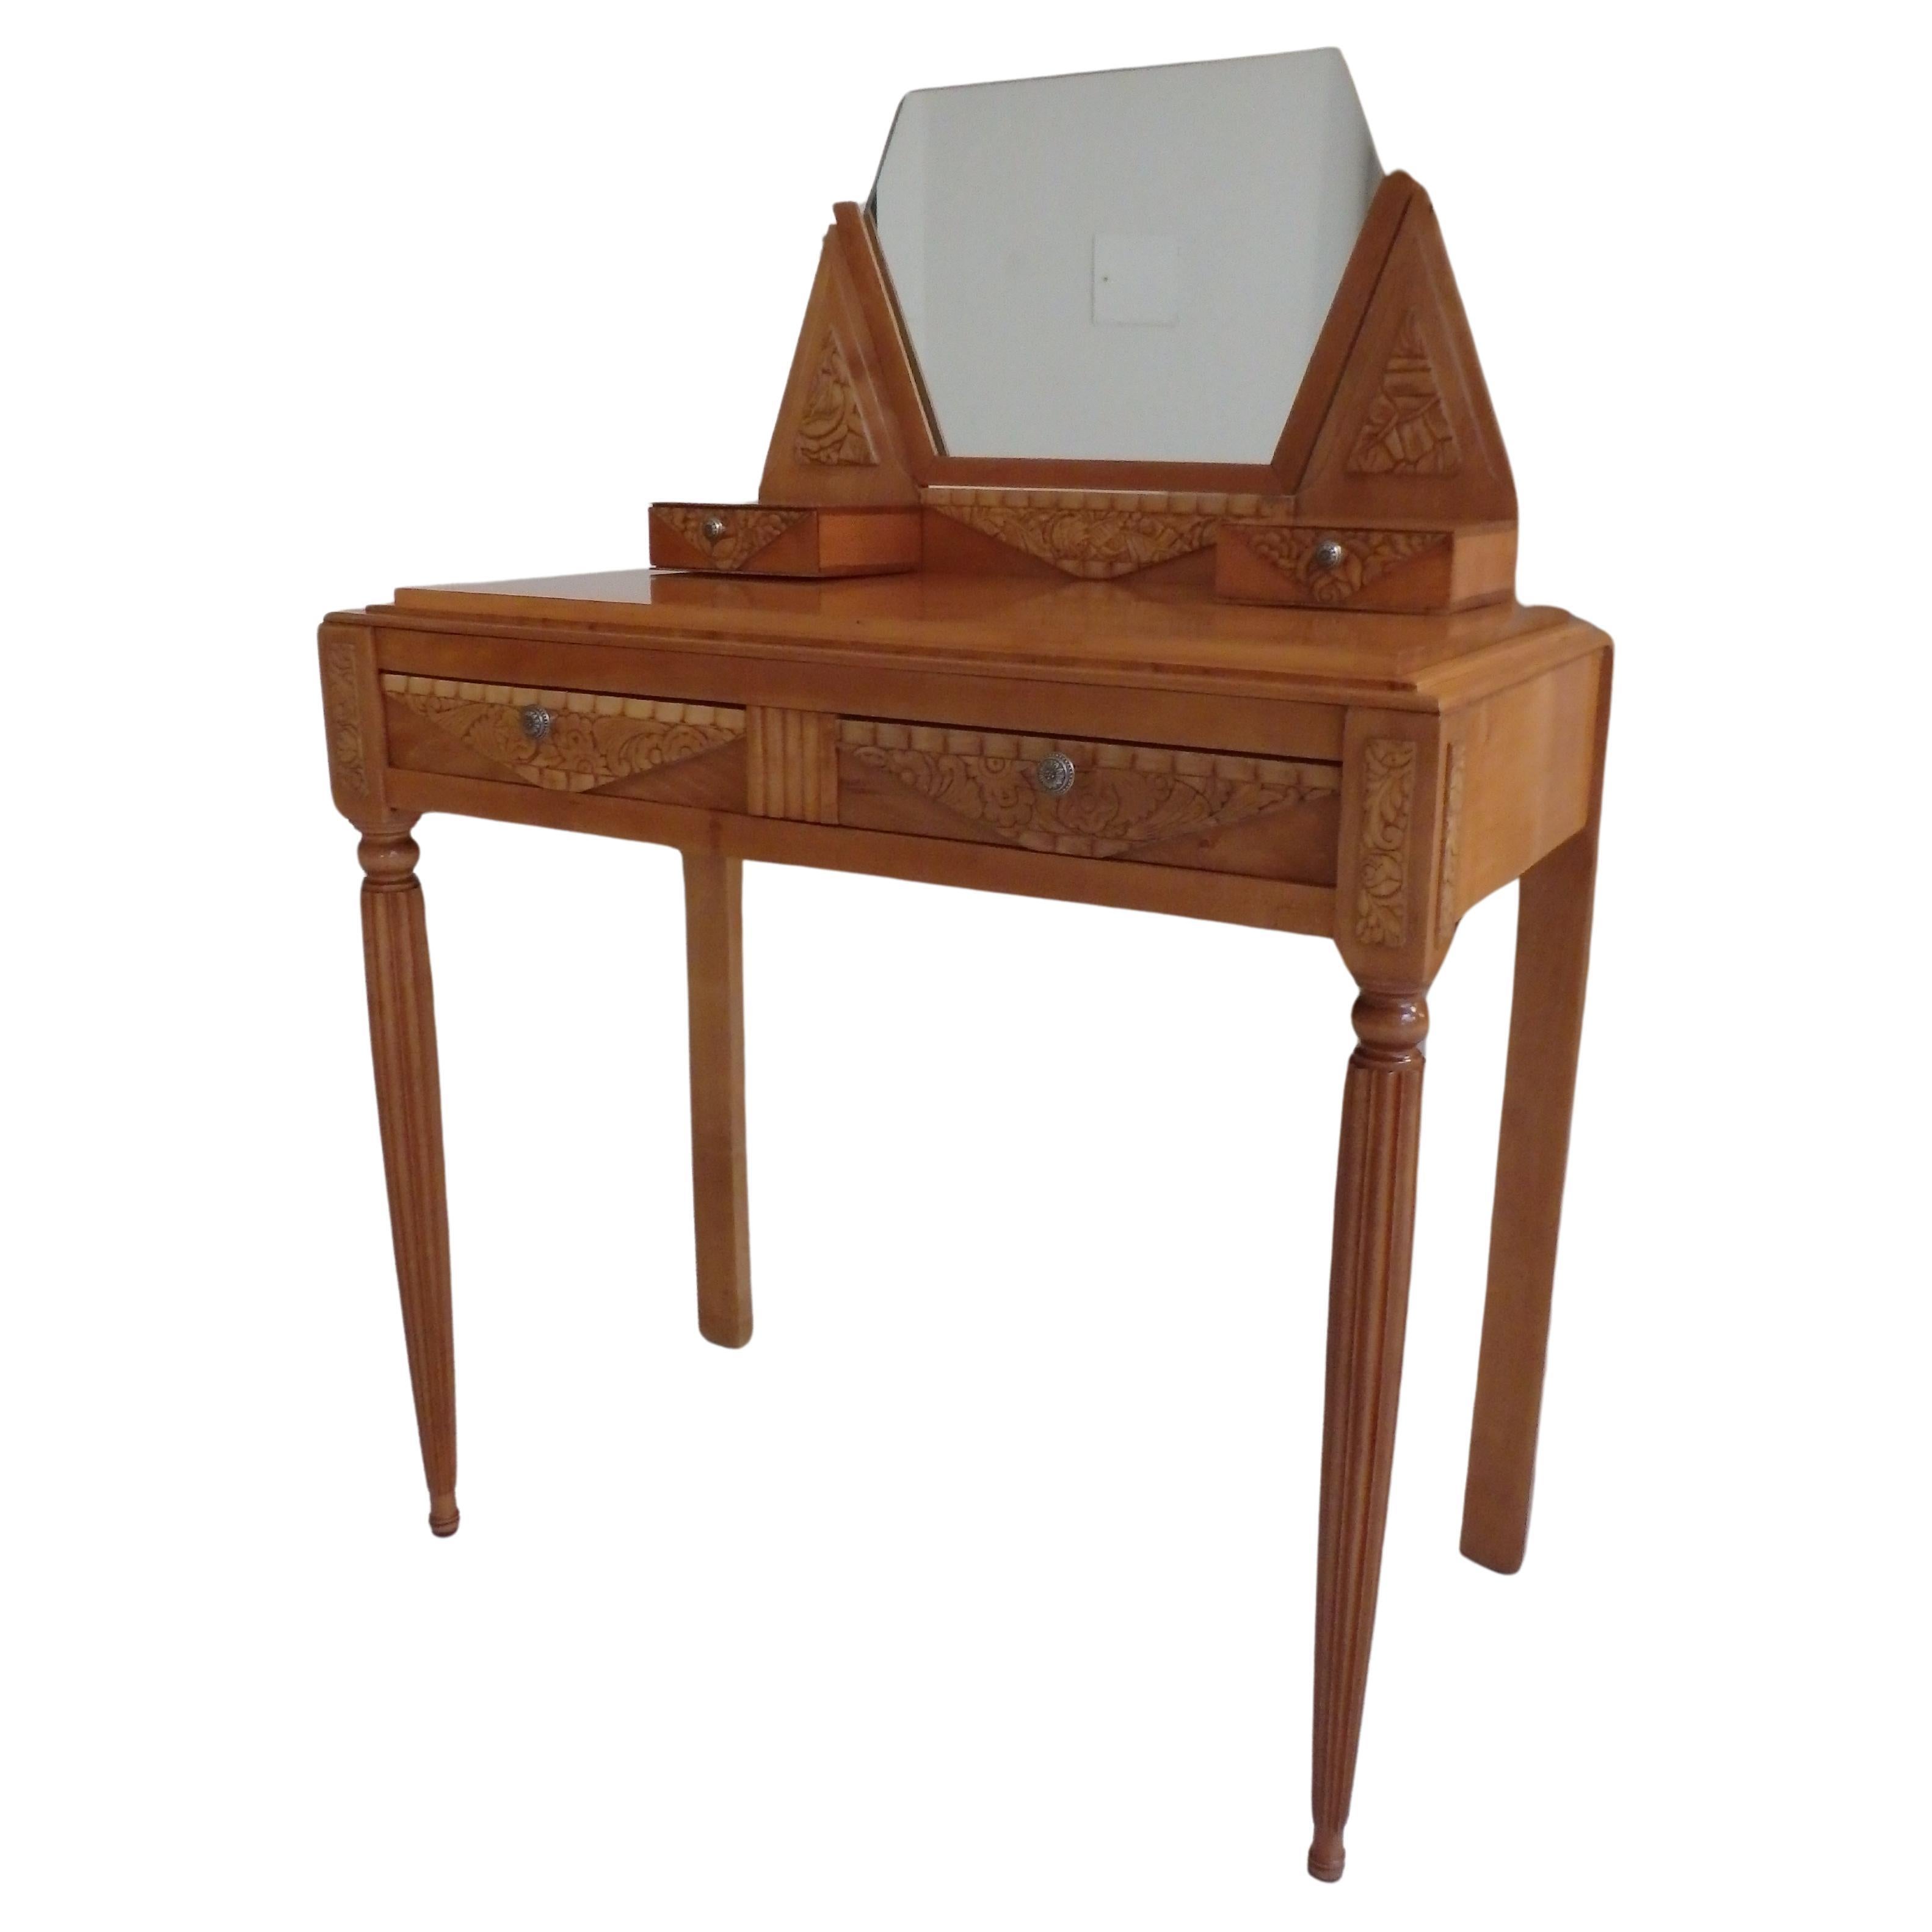 1920thies birch with cubistic carved flowers vanity , console or writing desk